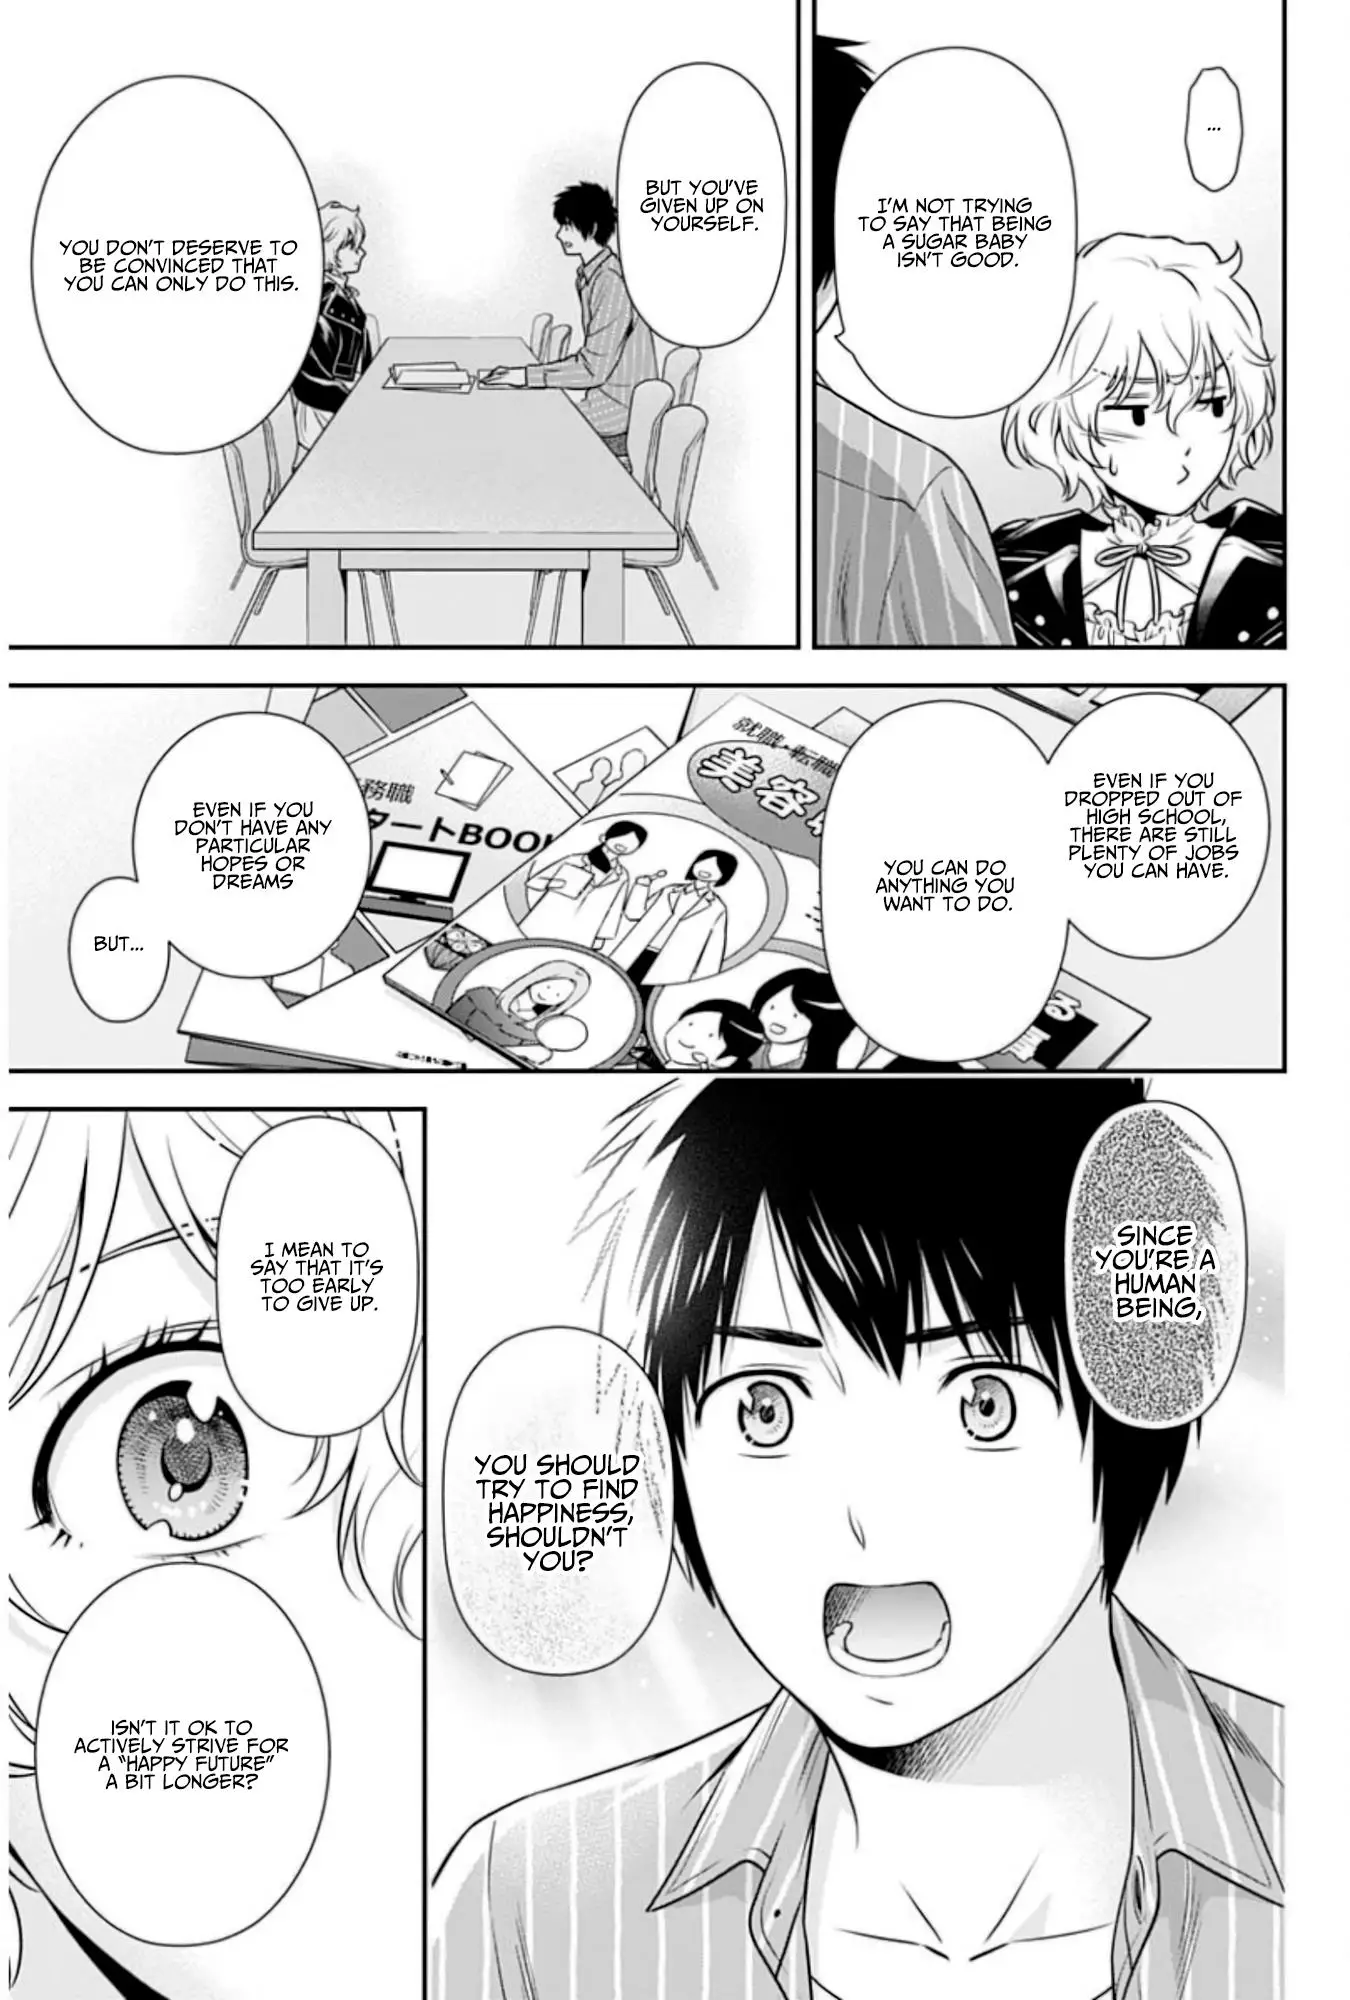 Can I Live With You? - 5 page 5-61f4540e